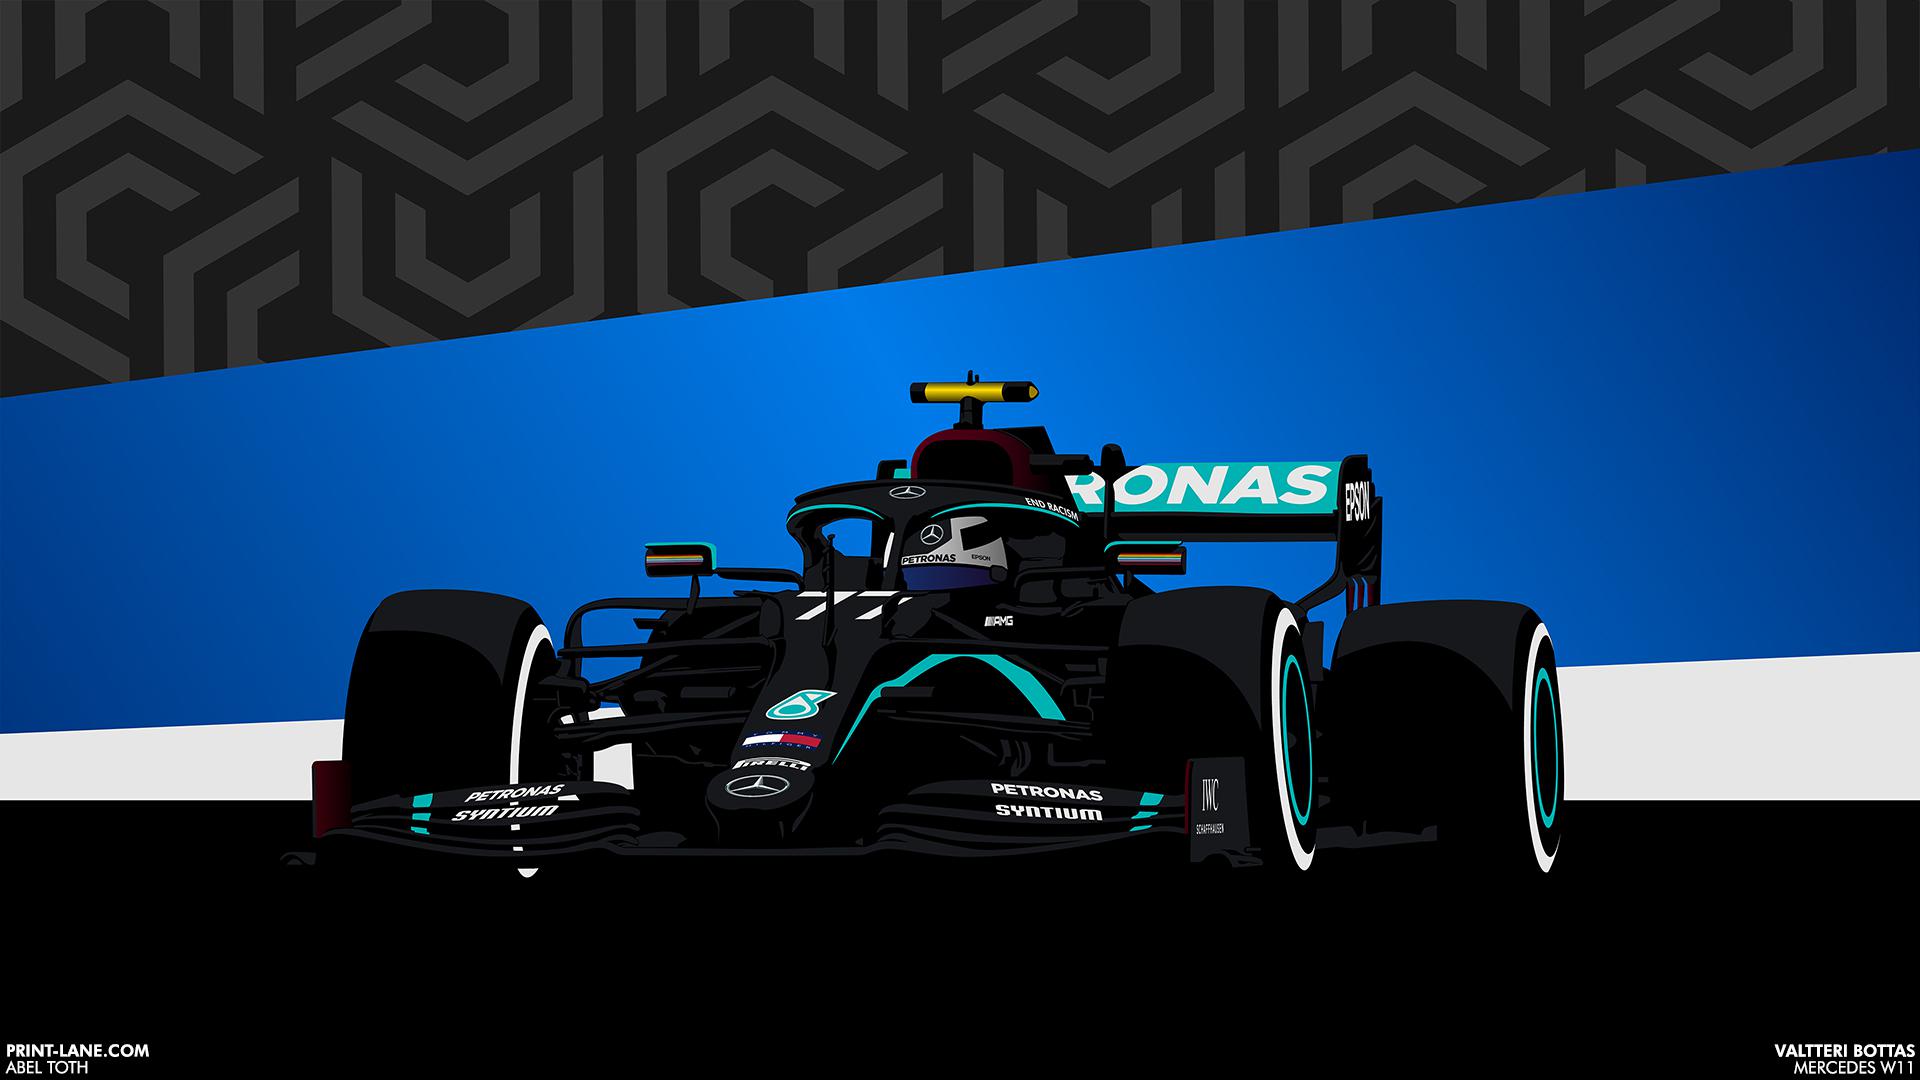 Celebrating Bottas' victory, I made a Mercedes W11 wallpaper (4K link in the comments)